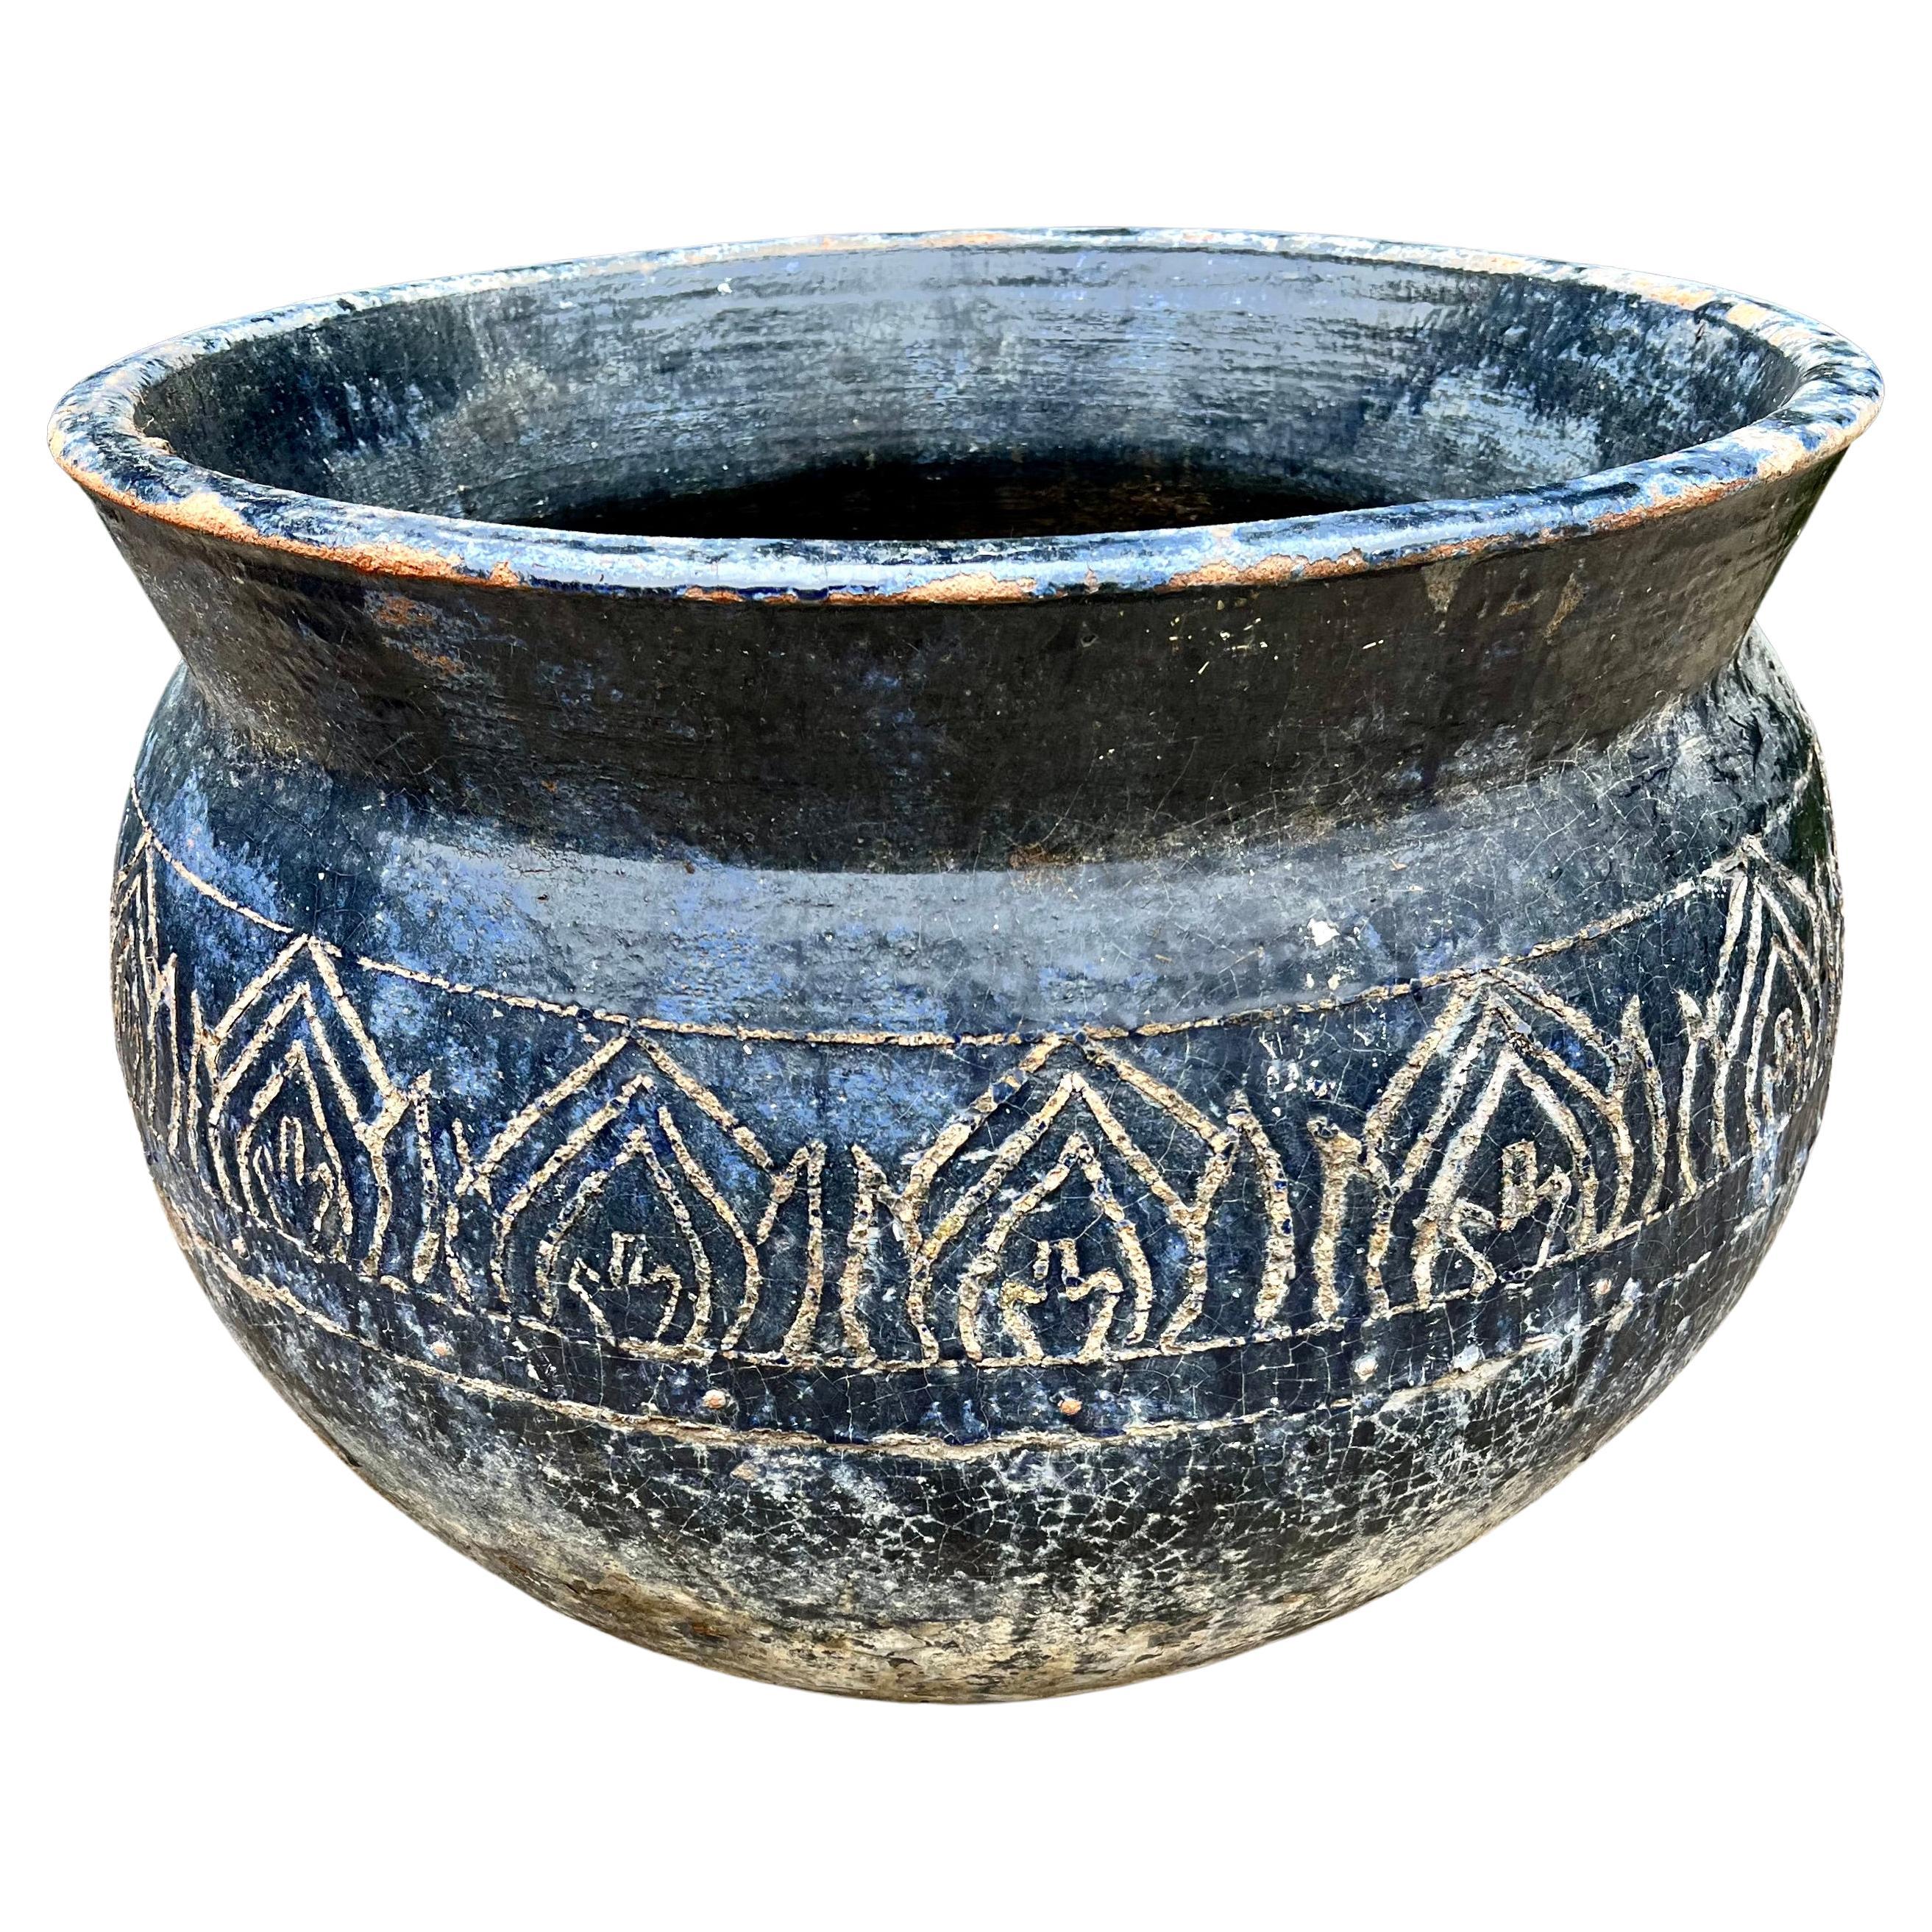 Blue Patinated Glazed Terracotta Planter with Etched Design